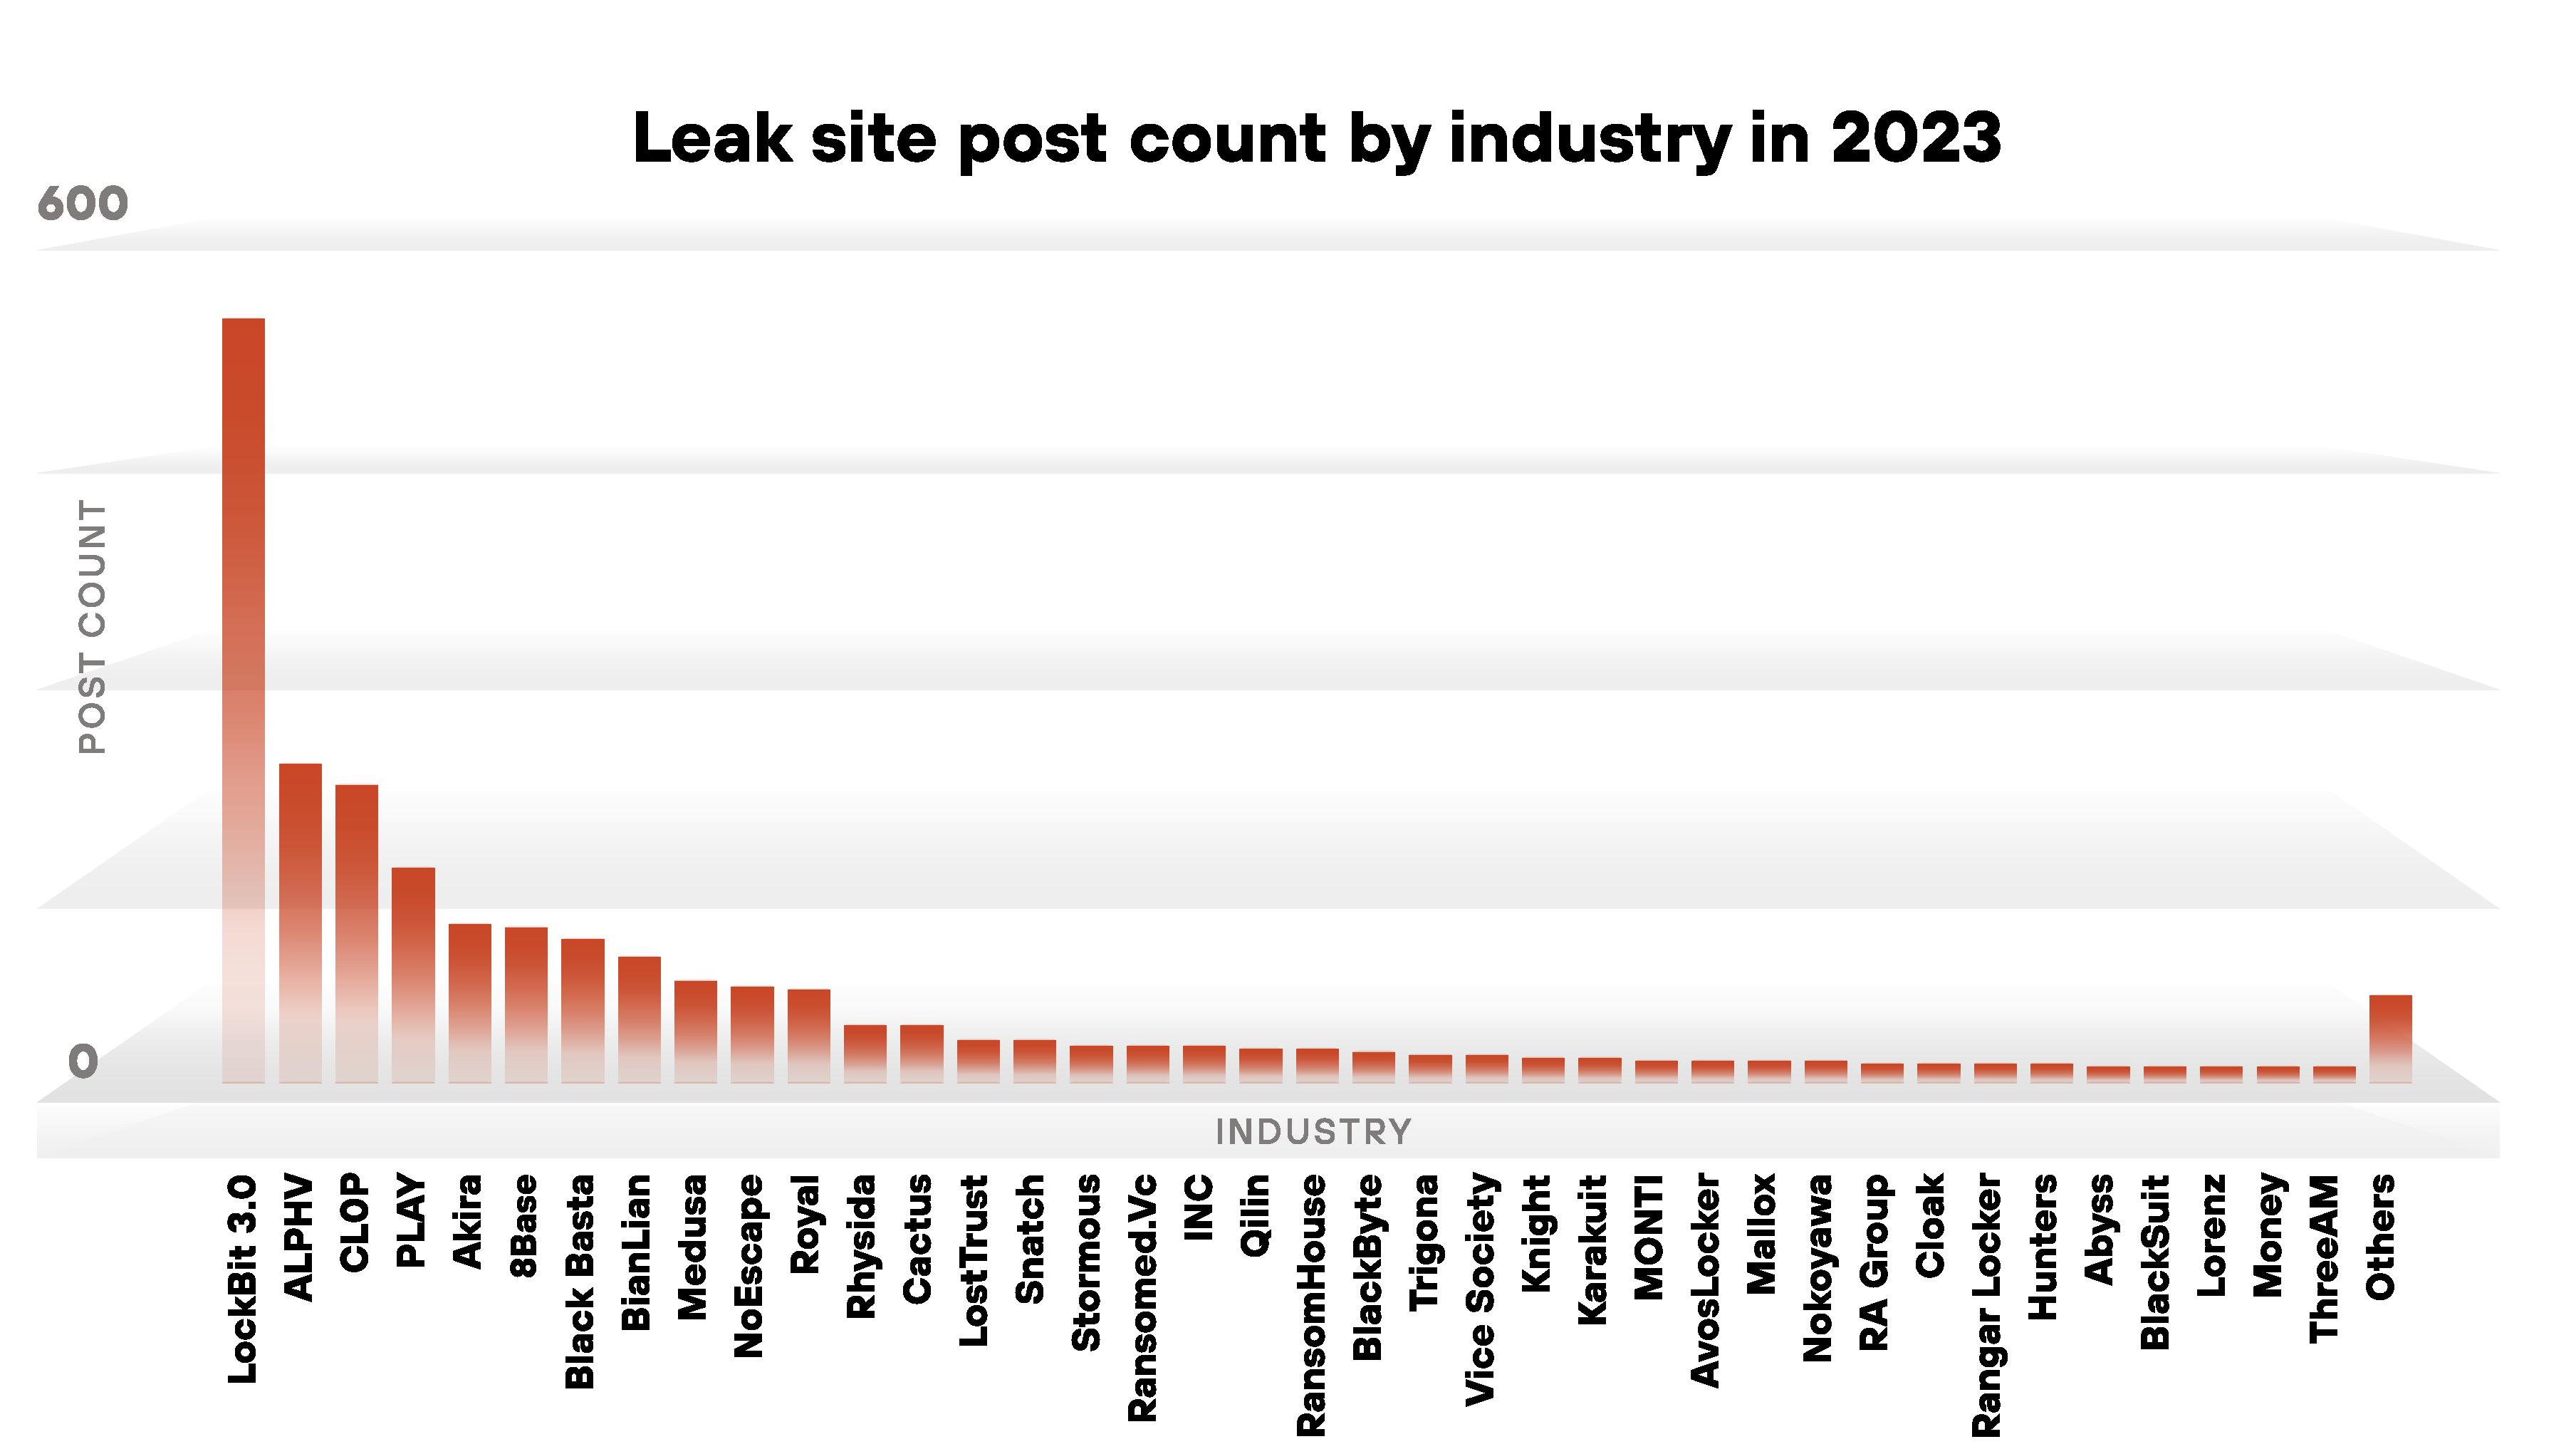 Image 9 is a column chart of industries affected in 2023 by ransomware leak site posts. The top three industries are manufacturing, professional and legal services and high technology. 